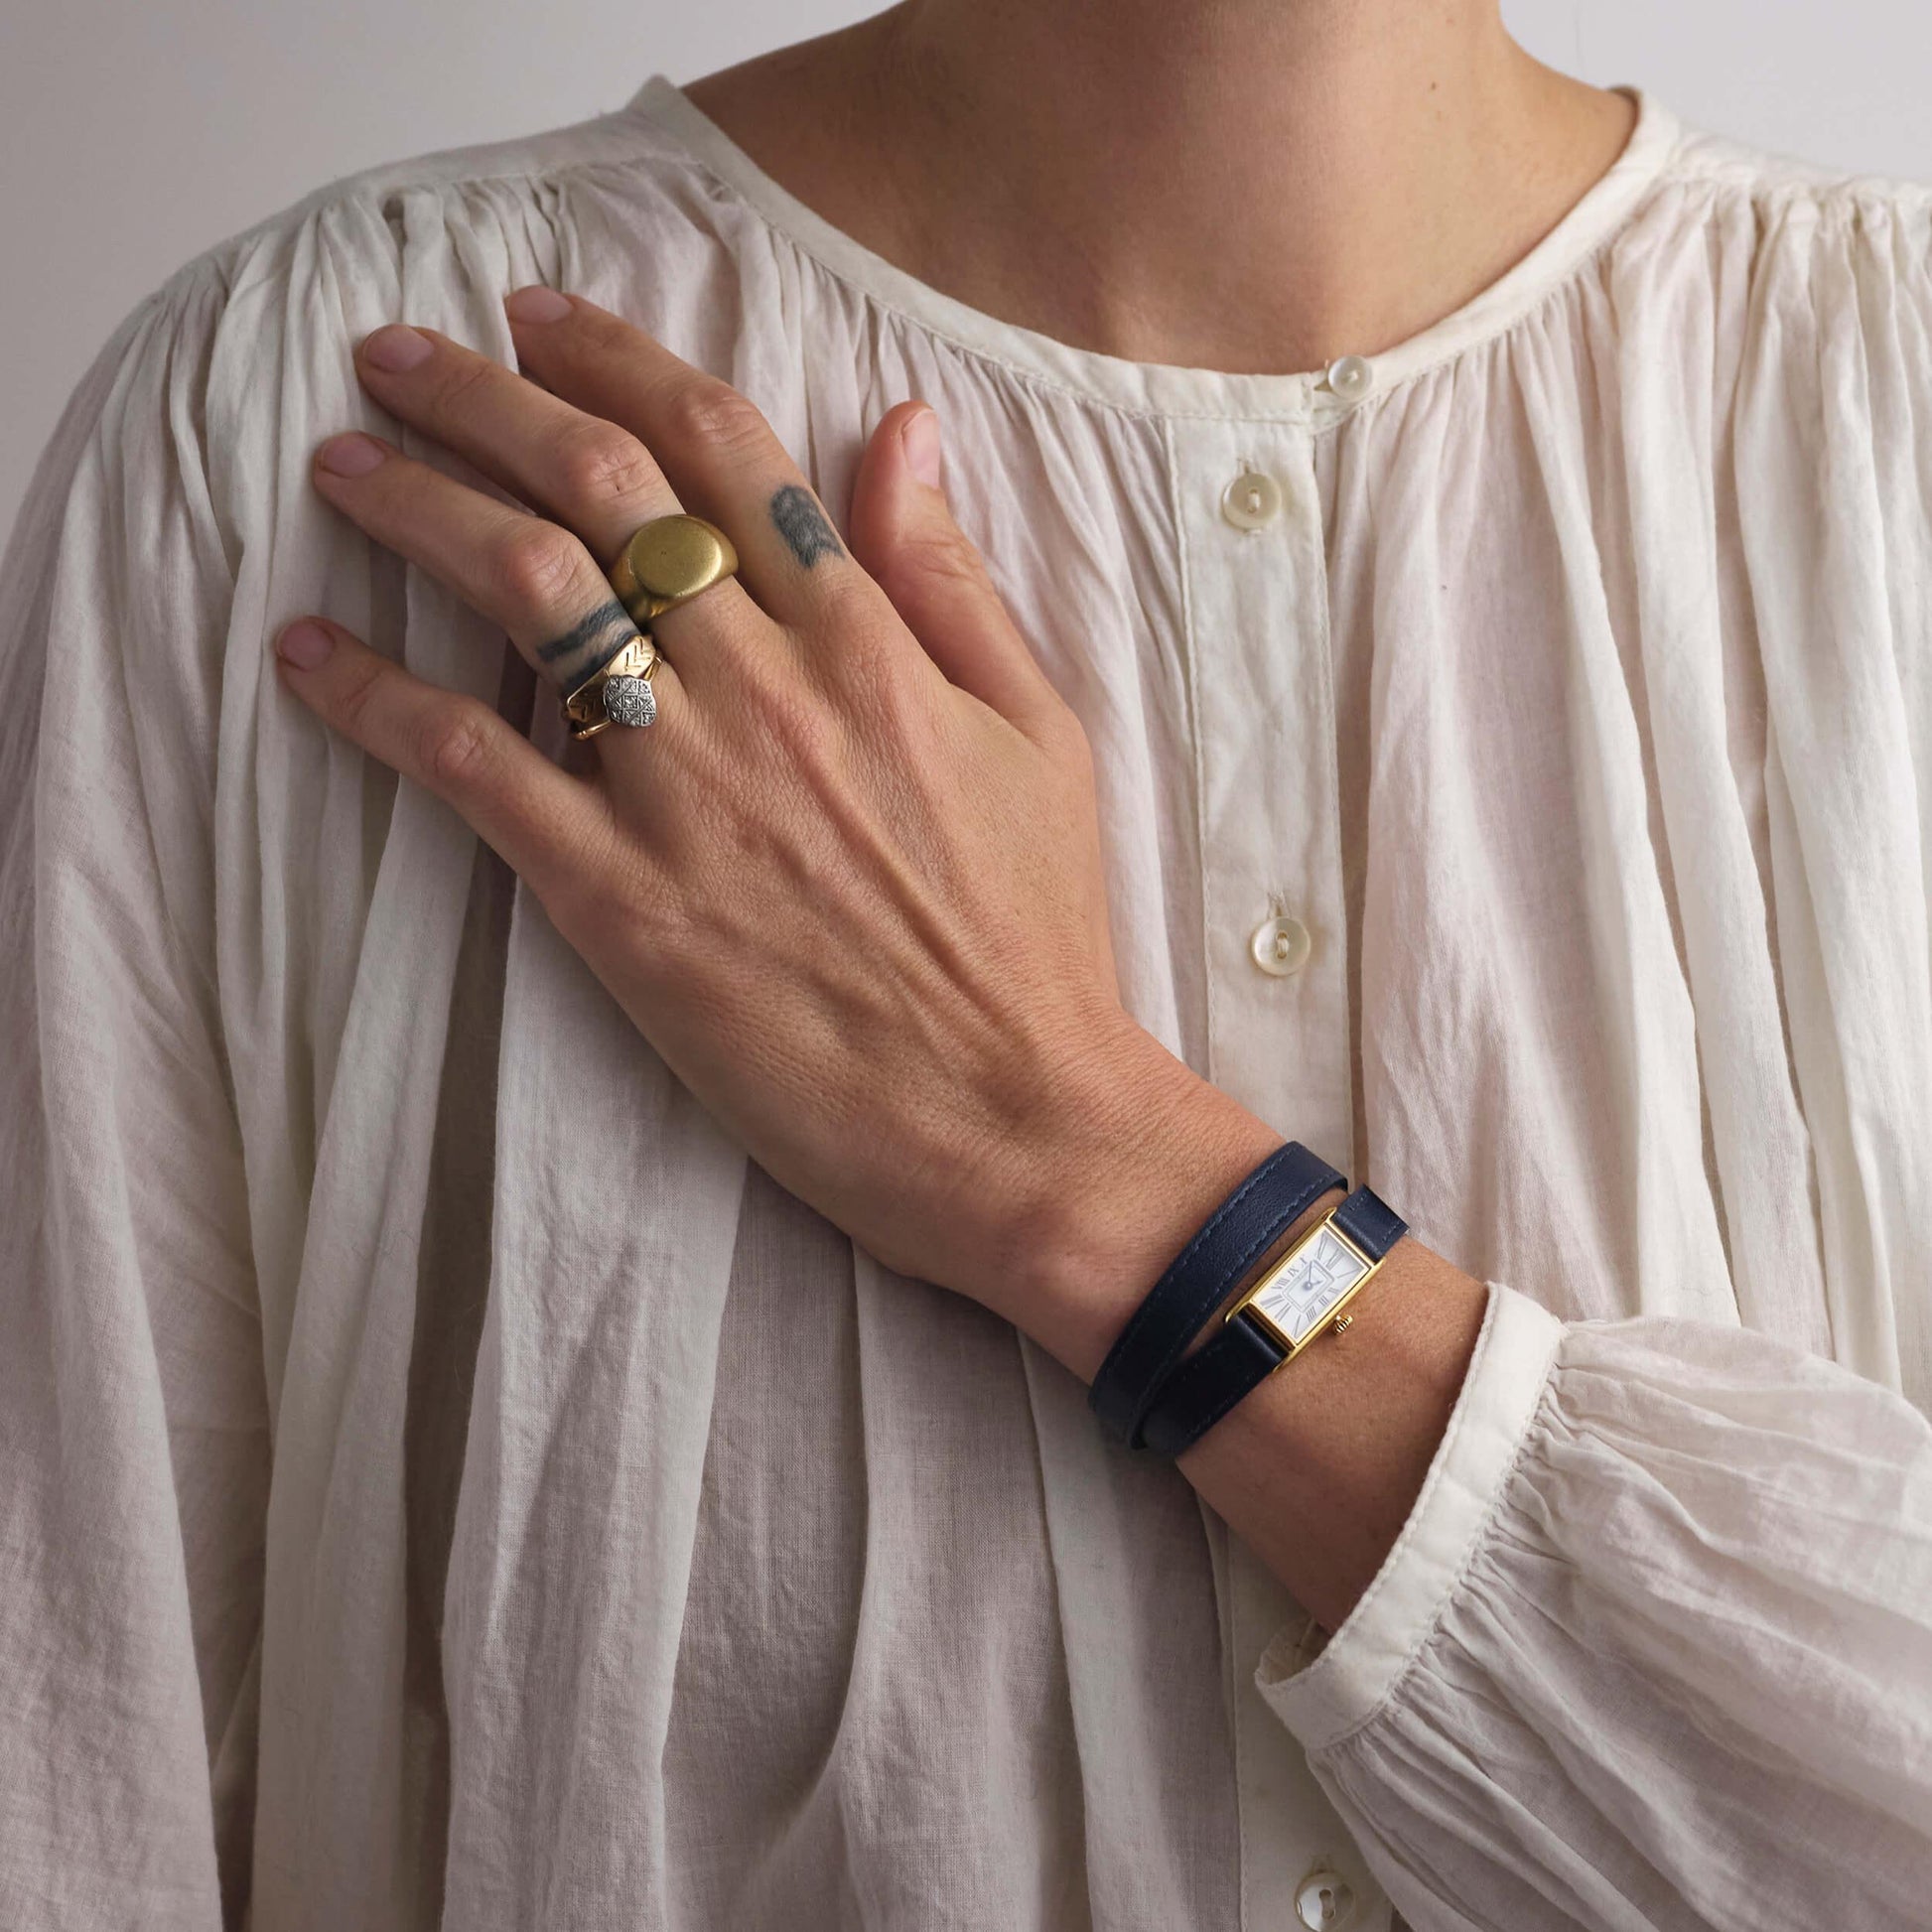 Woman wearing white shirt and navy Kimsey Watch in Brown Leather “Double Wrap” Strap and gold hardware